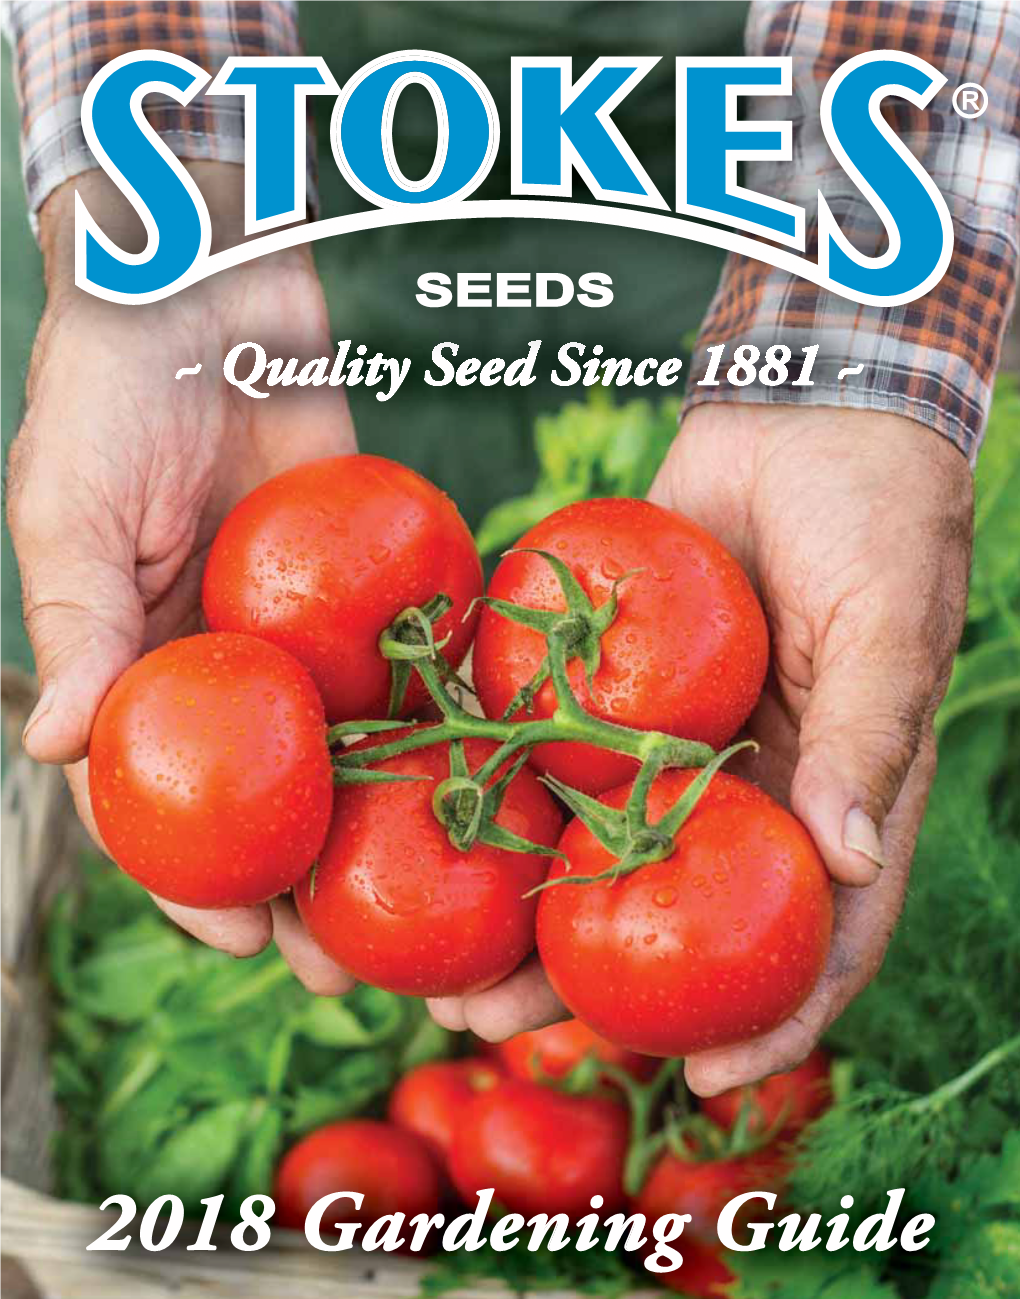 Quality Seed Since 1881 ~